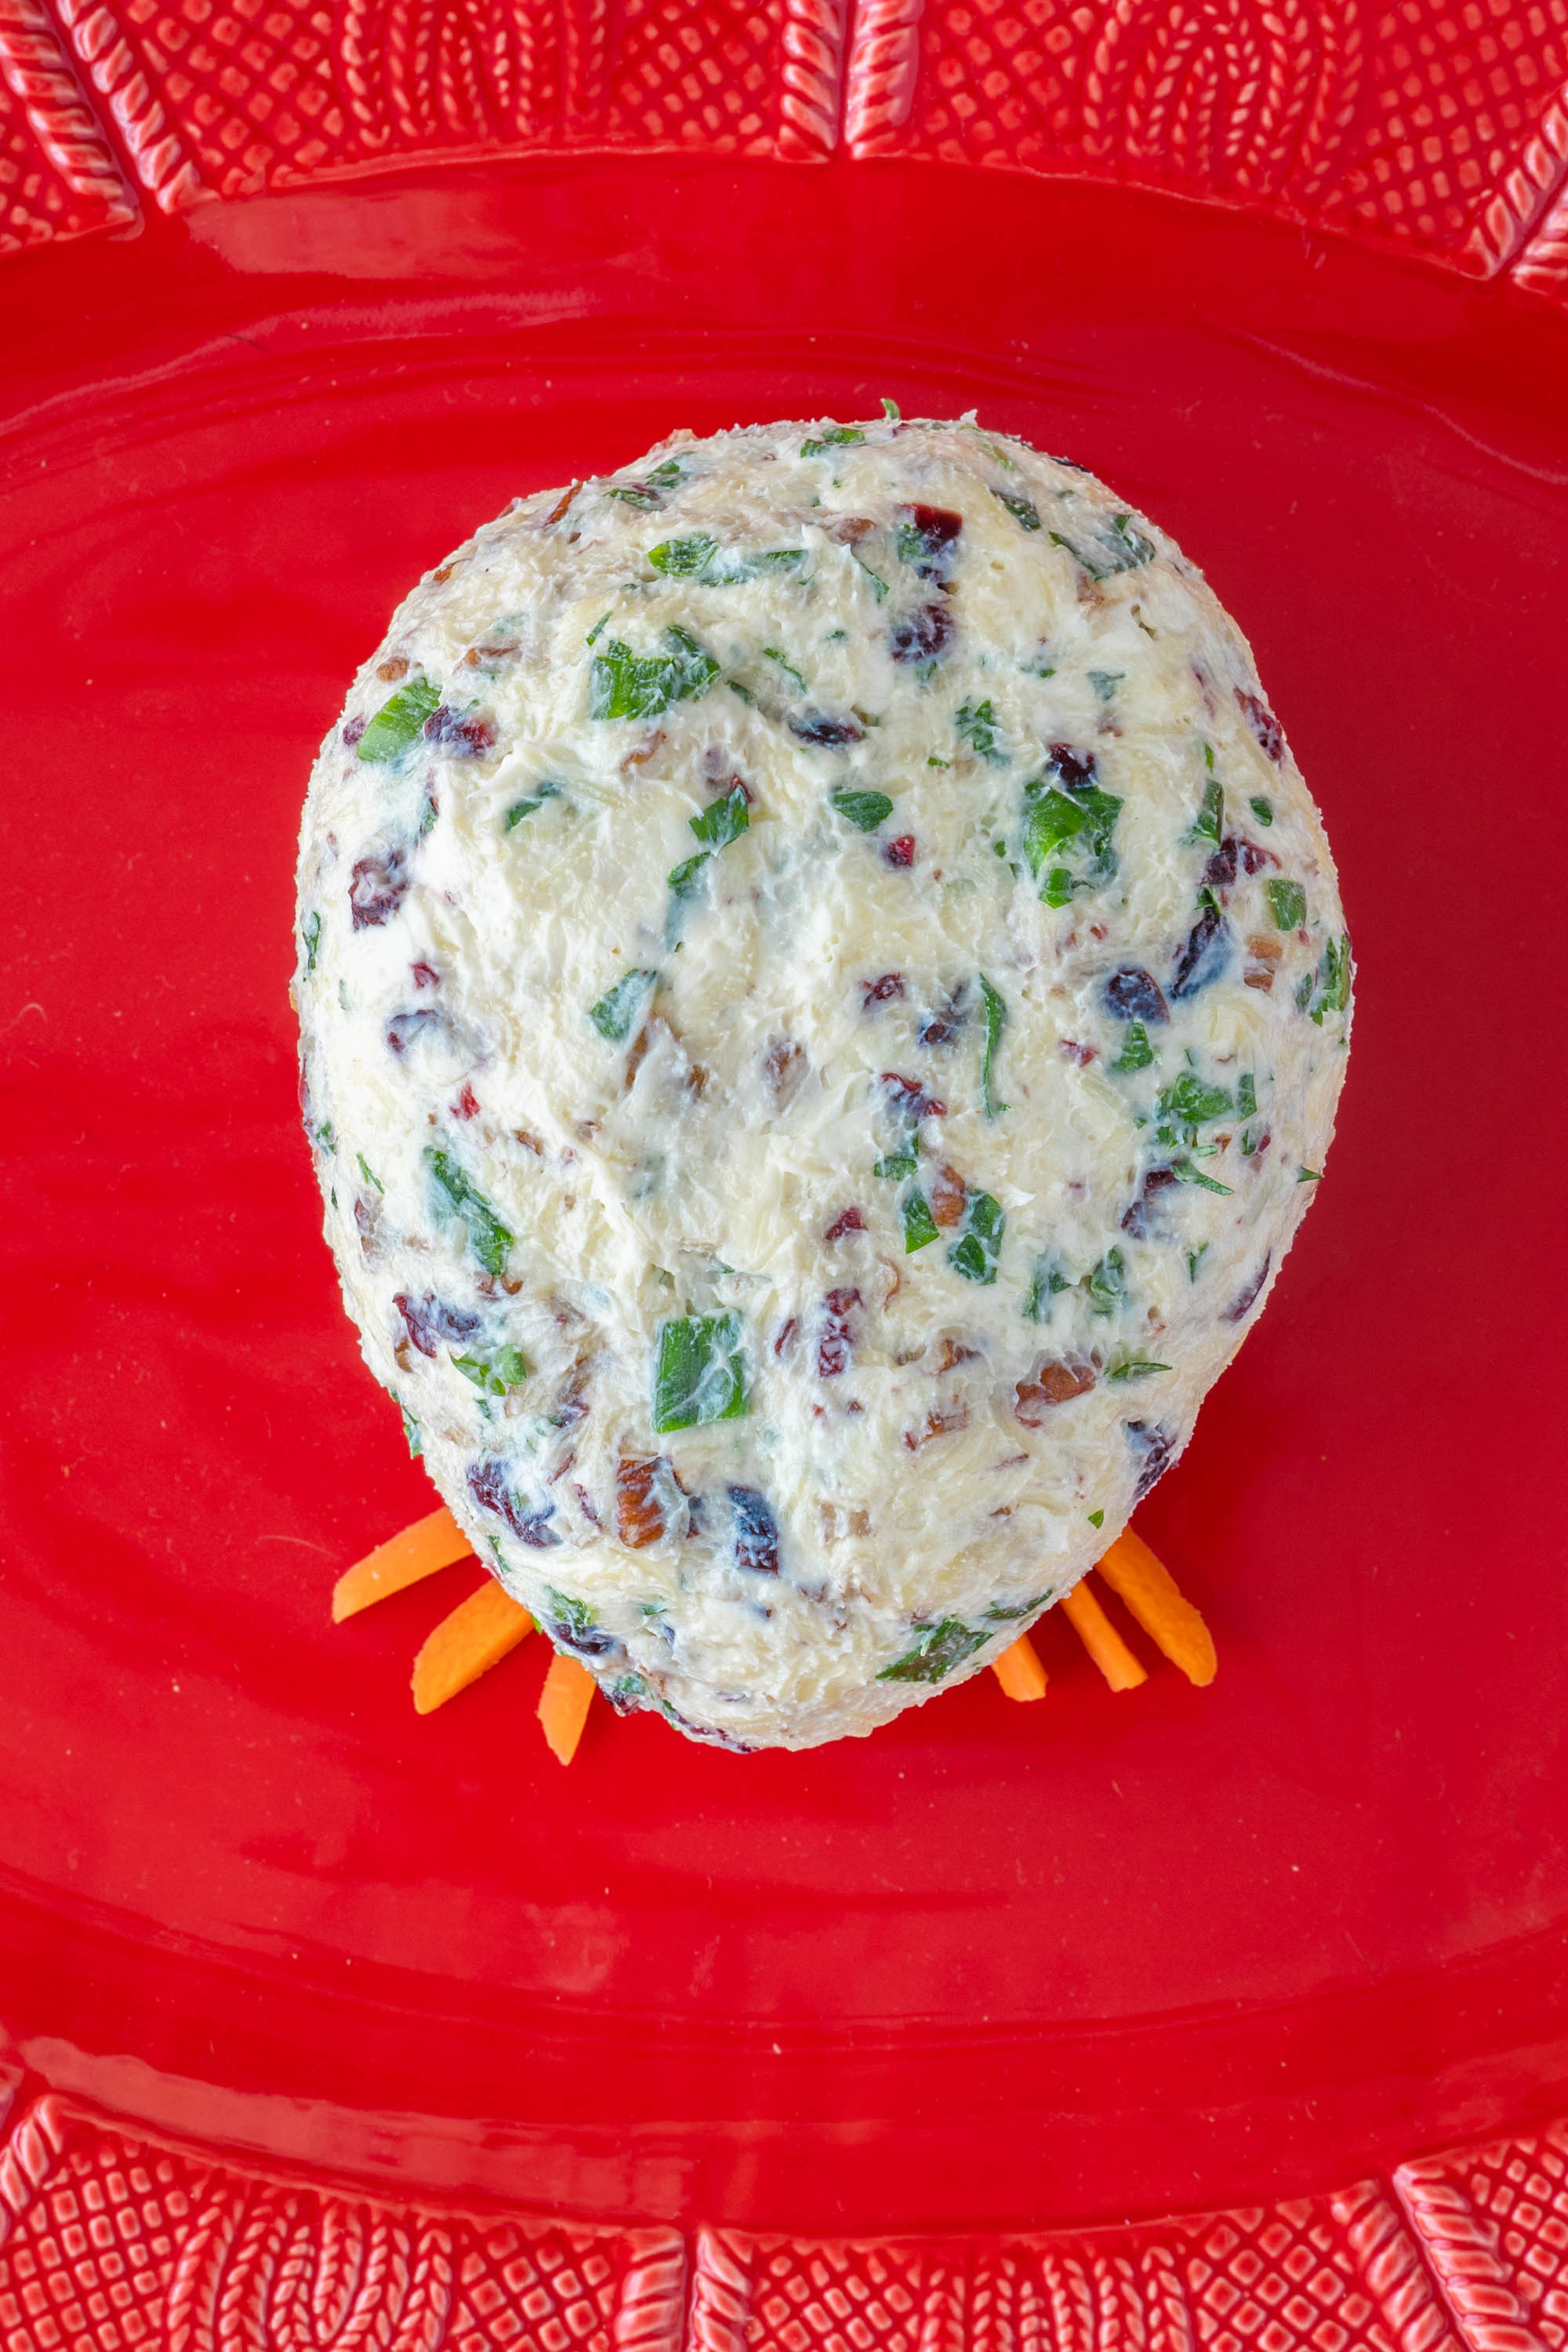 Building the Body of a Turkey Cheese Ball